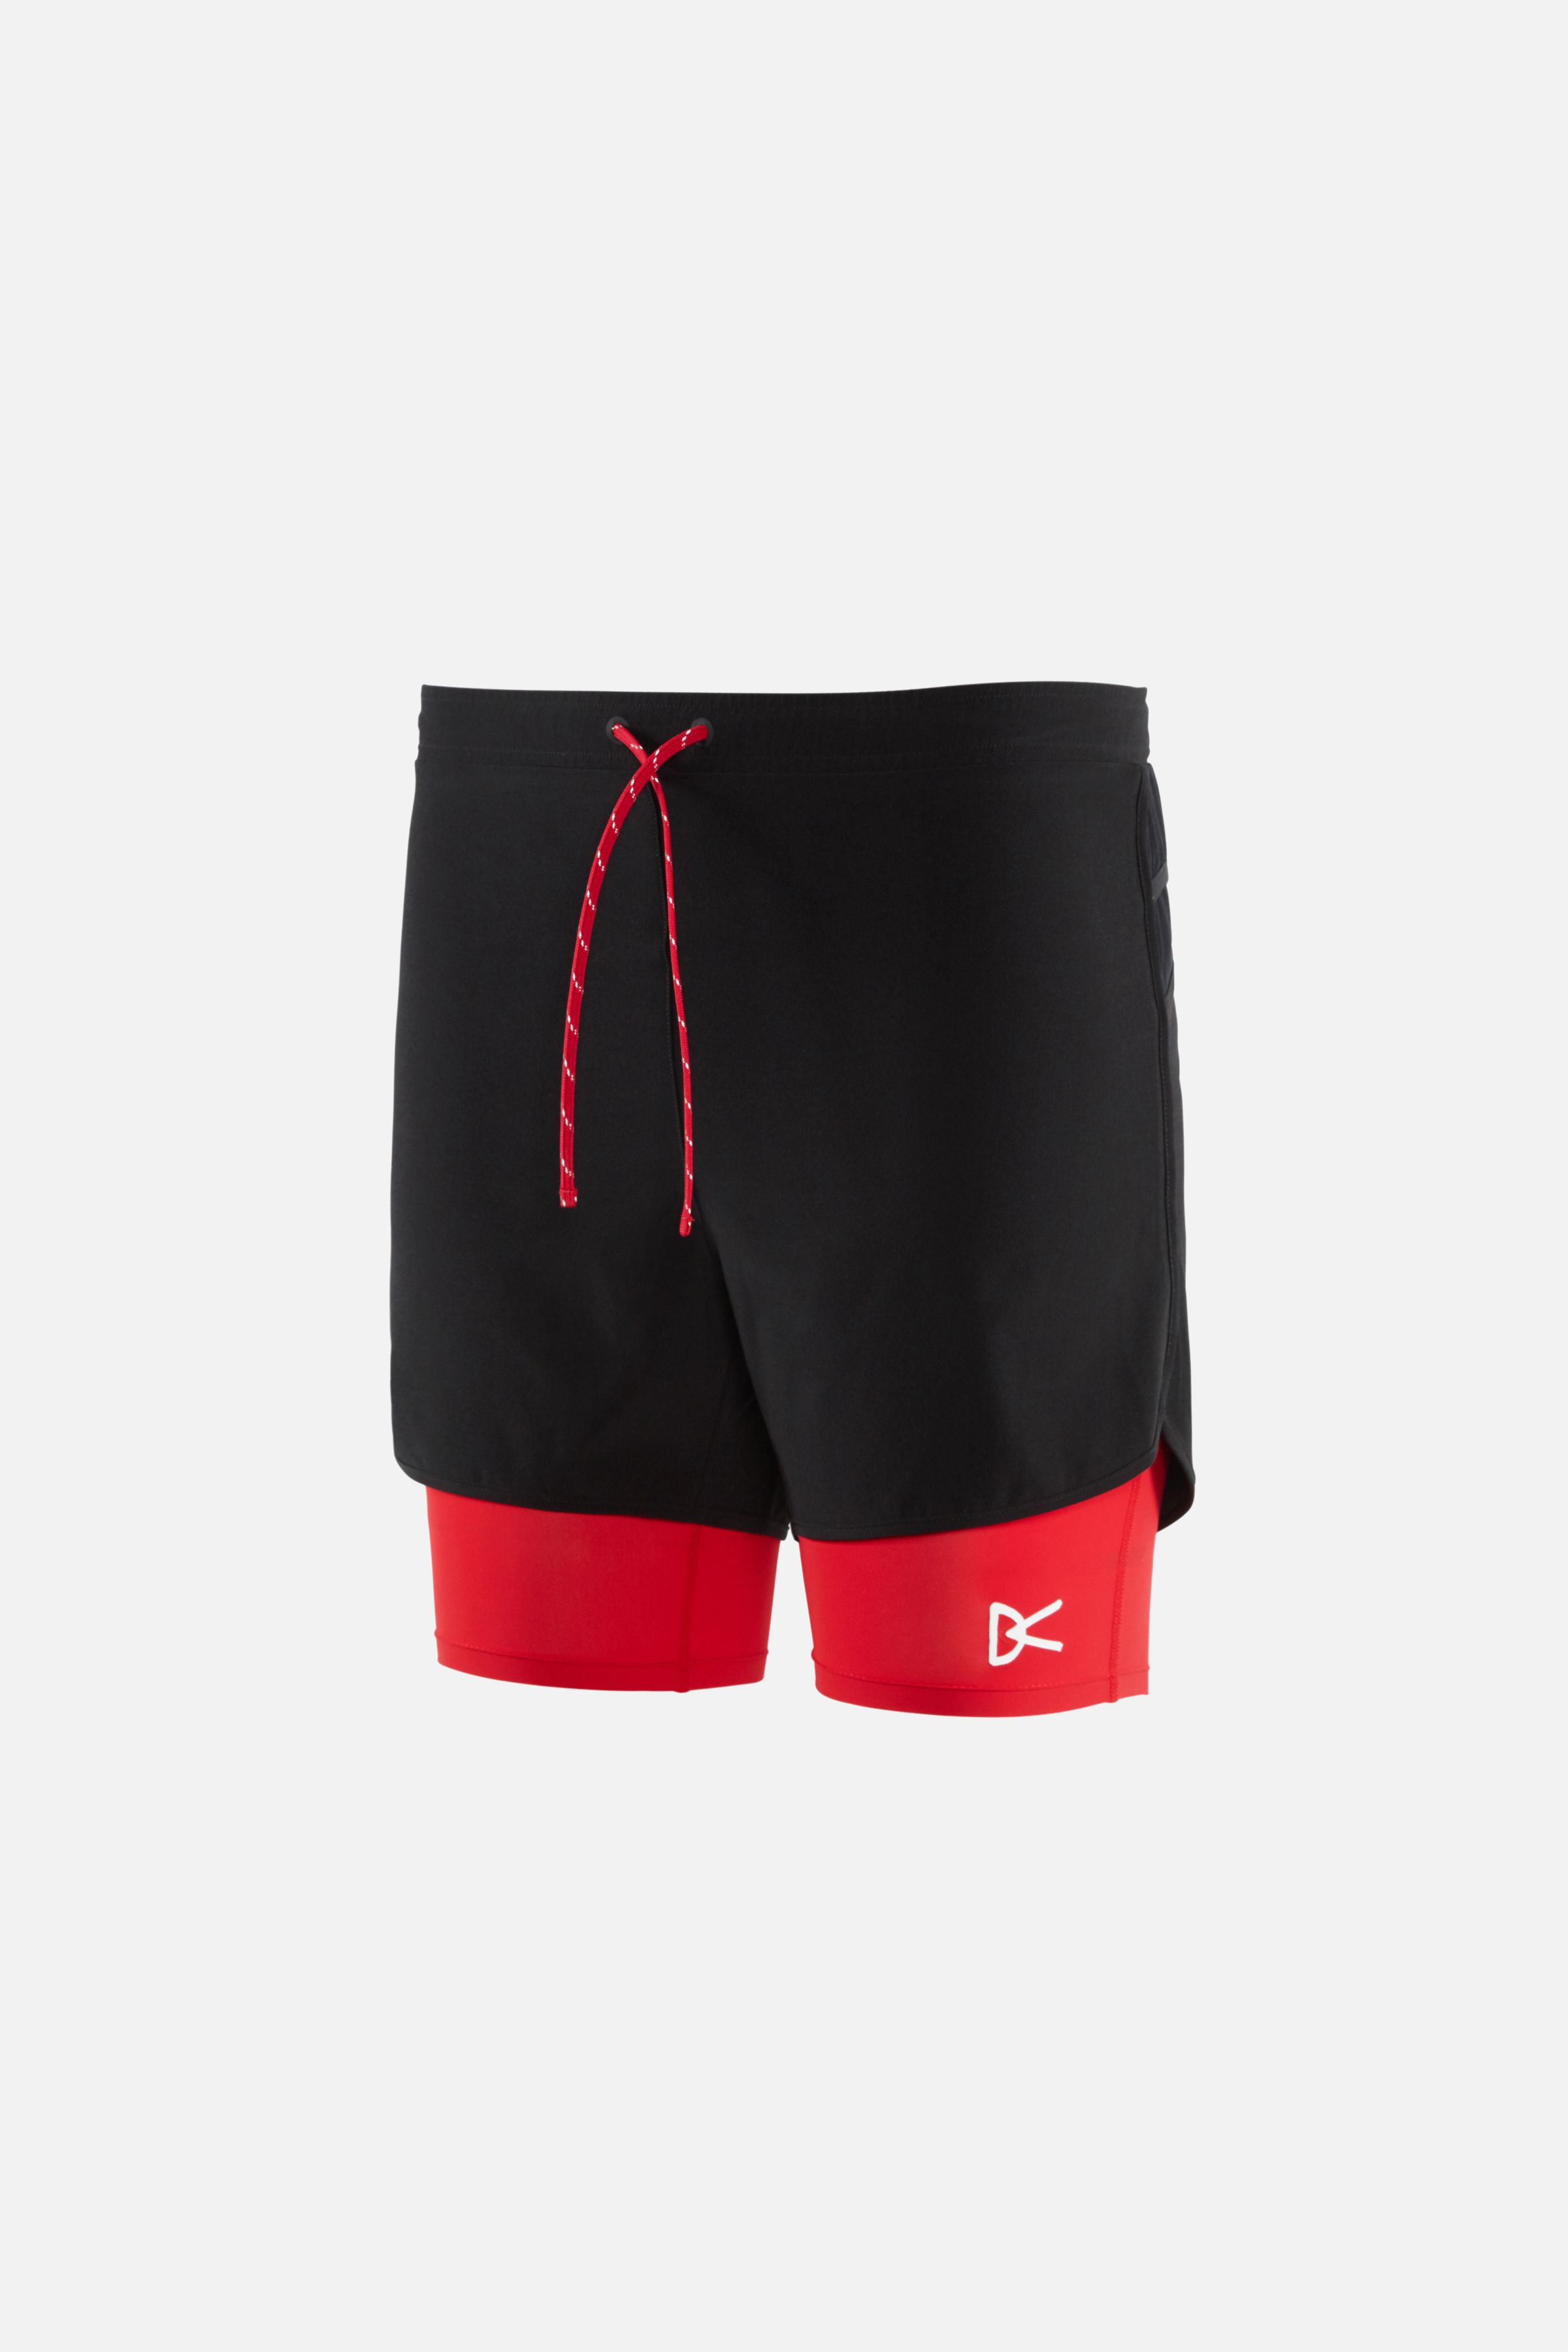 Aaron Layered Shorts, Black/Red